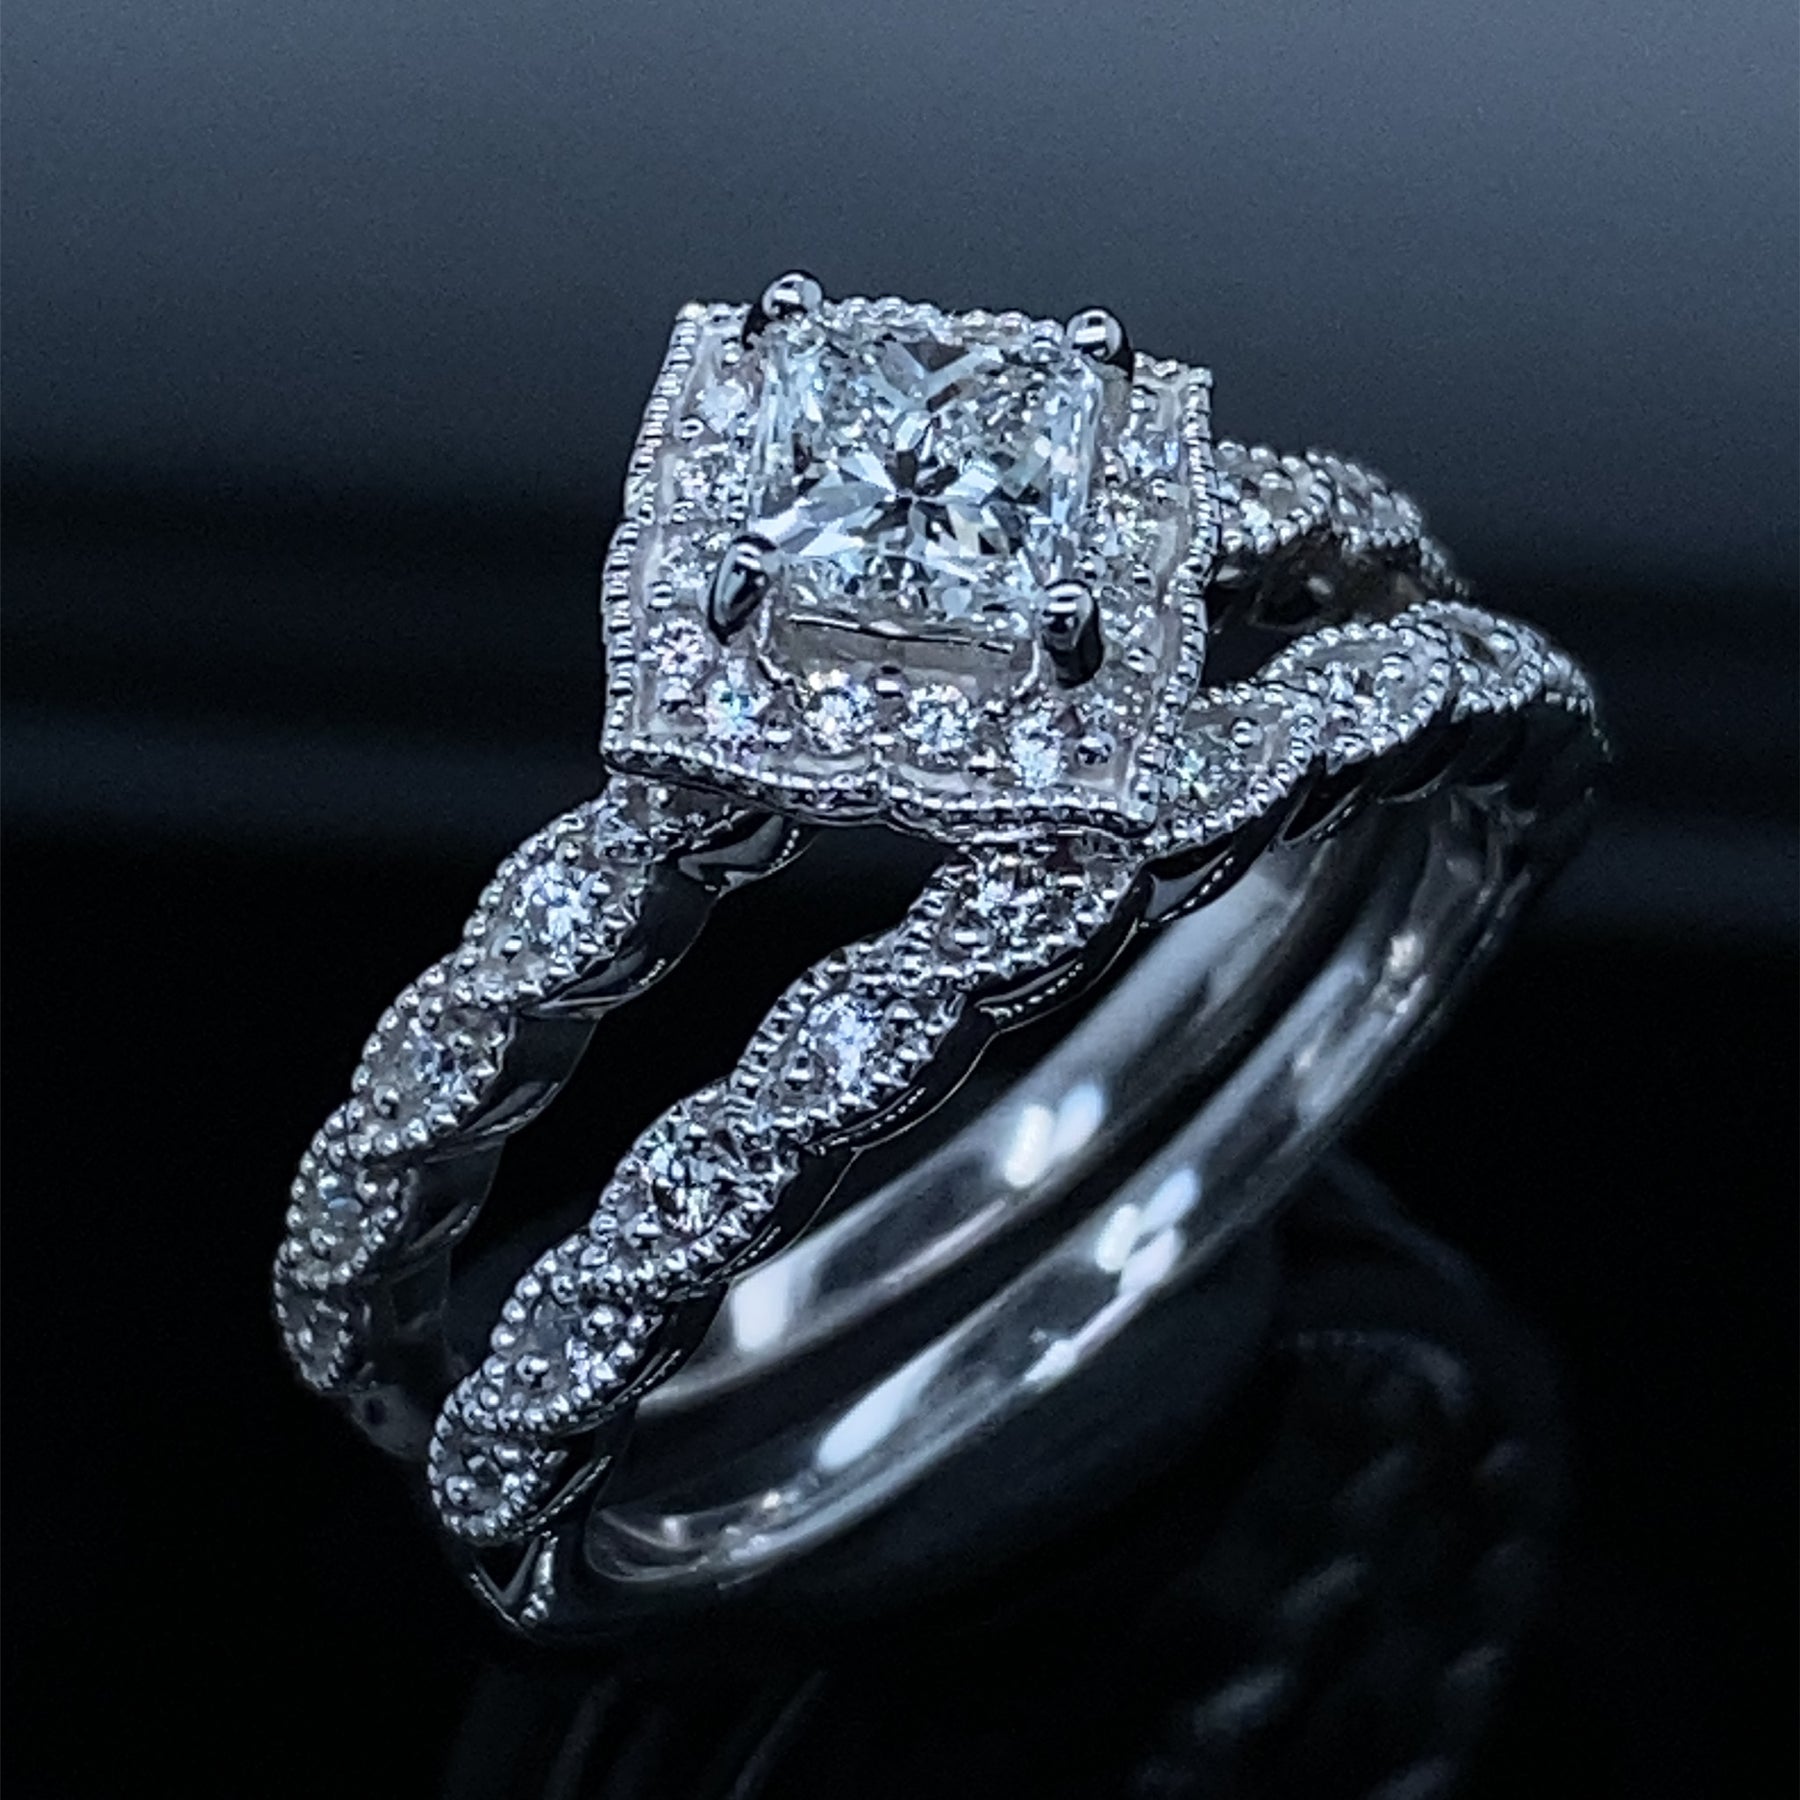 1 Diamond Source - Select from over 50,000 GIA certified loose wholesale  diamonds at #1 Diamond Source. Then, custom design your own engagement ring  using 3D computer rendering and set your diamond